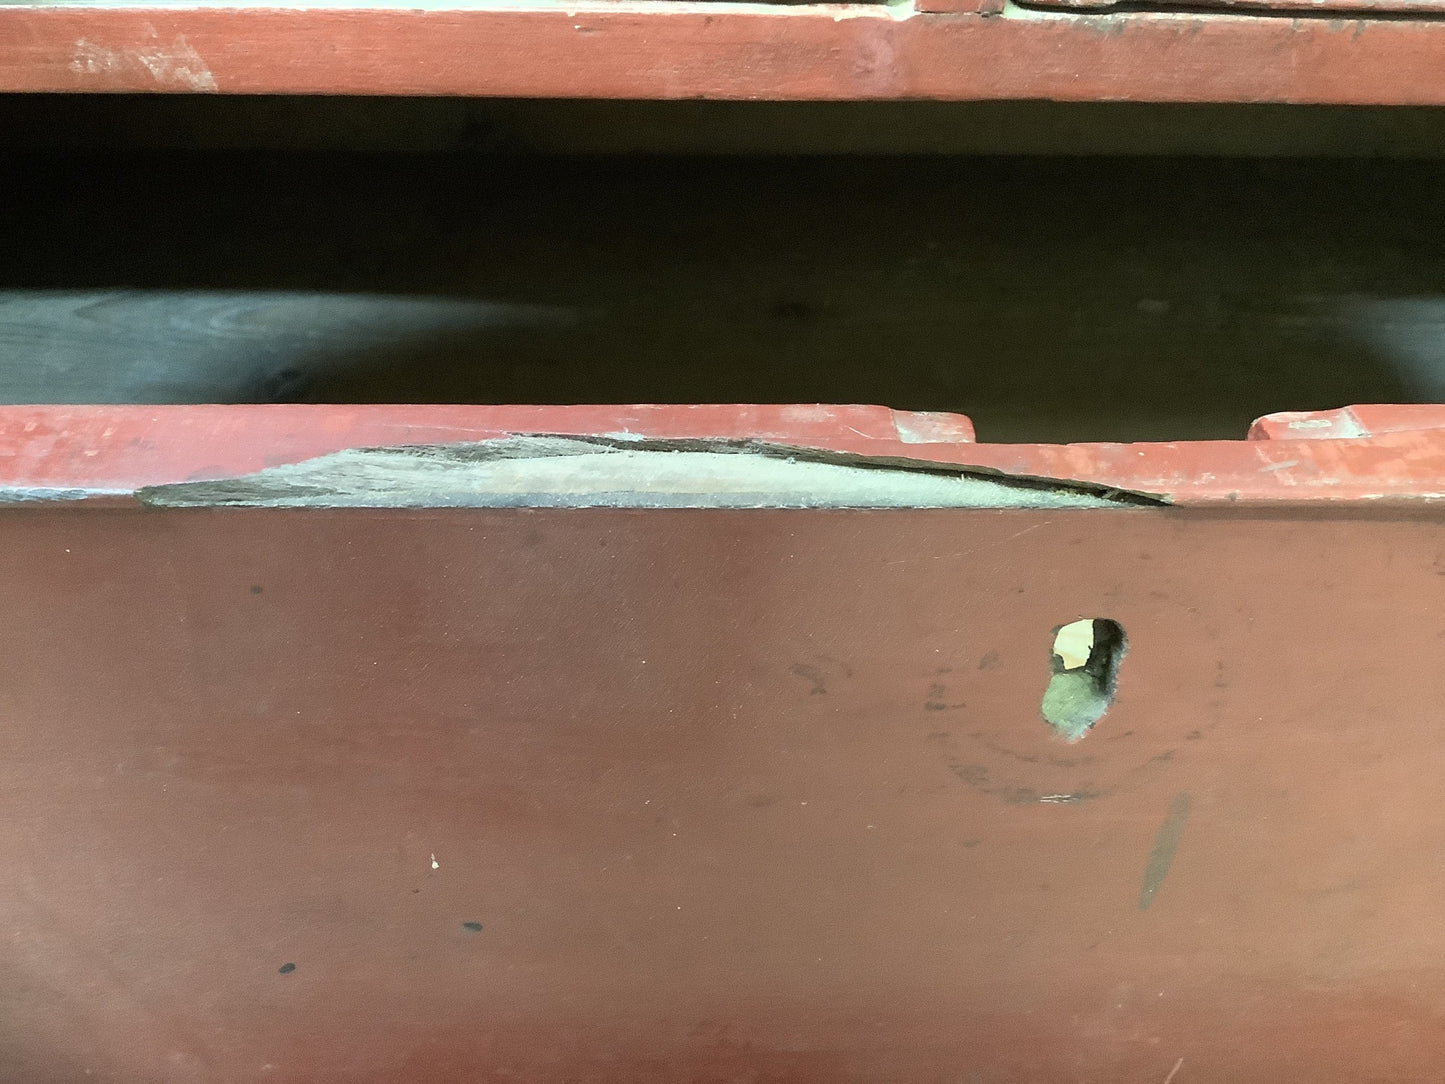 Damage to edge of first long drawers lock been removed